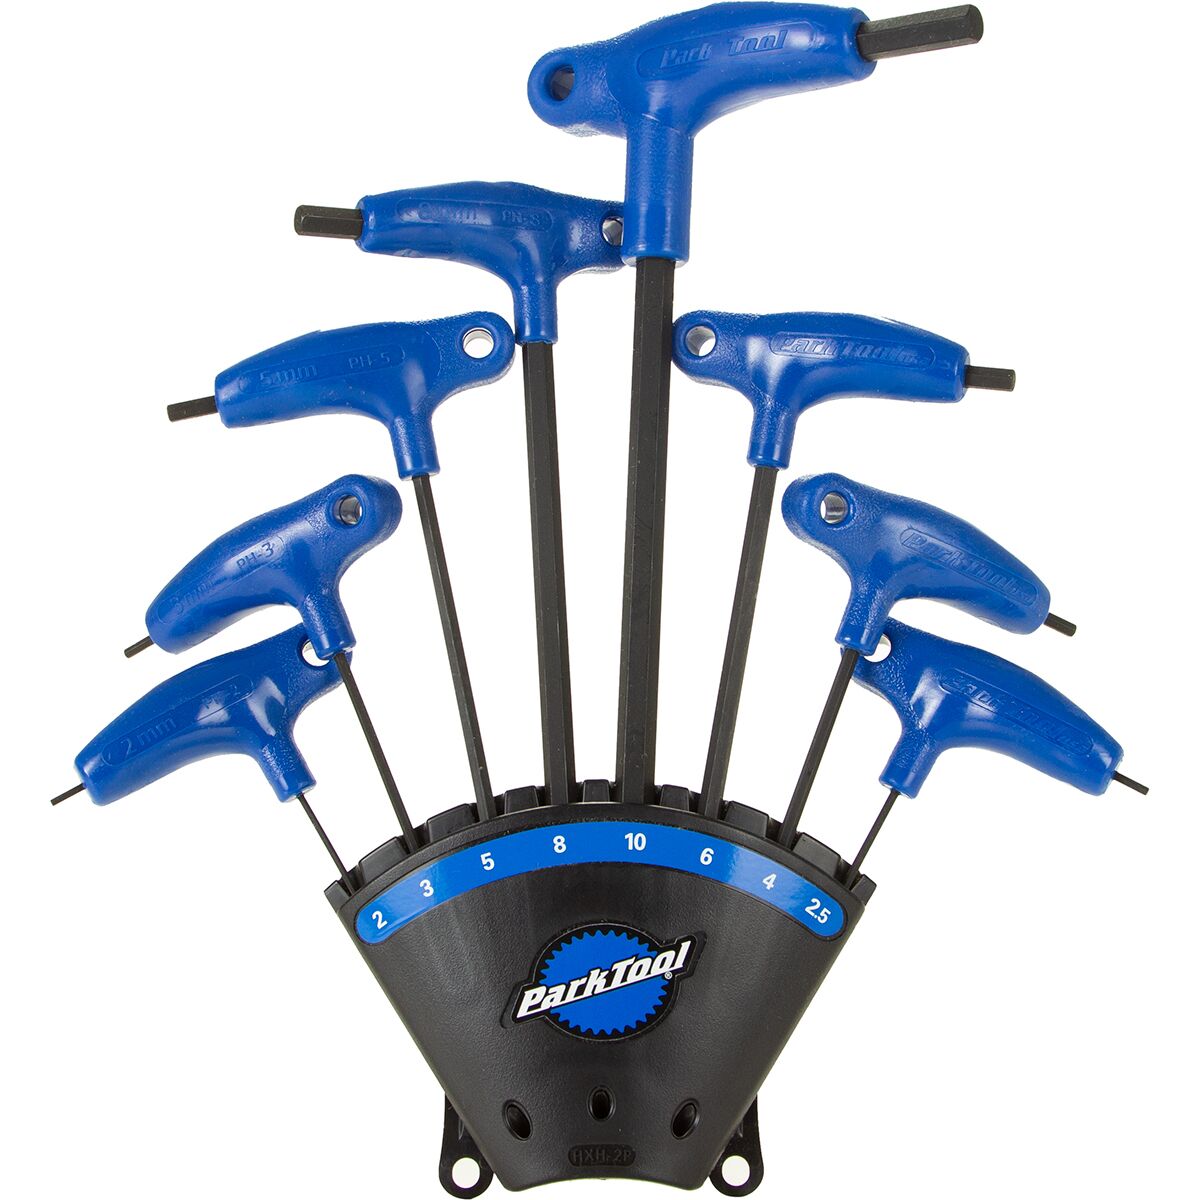 Park Tool PH-1.2 P-Handled Hex 8pc Wrench Set + Holder Black/Blue, One Size